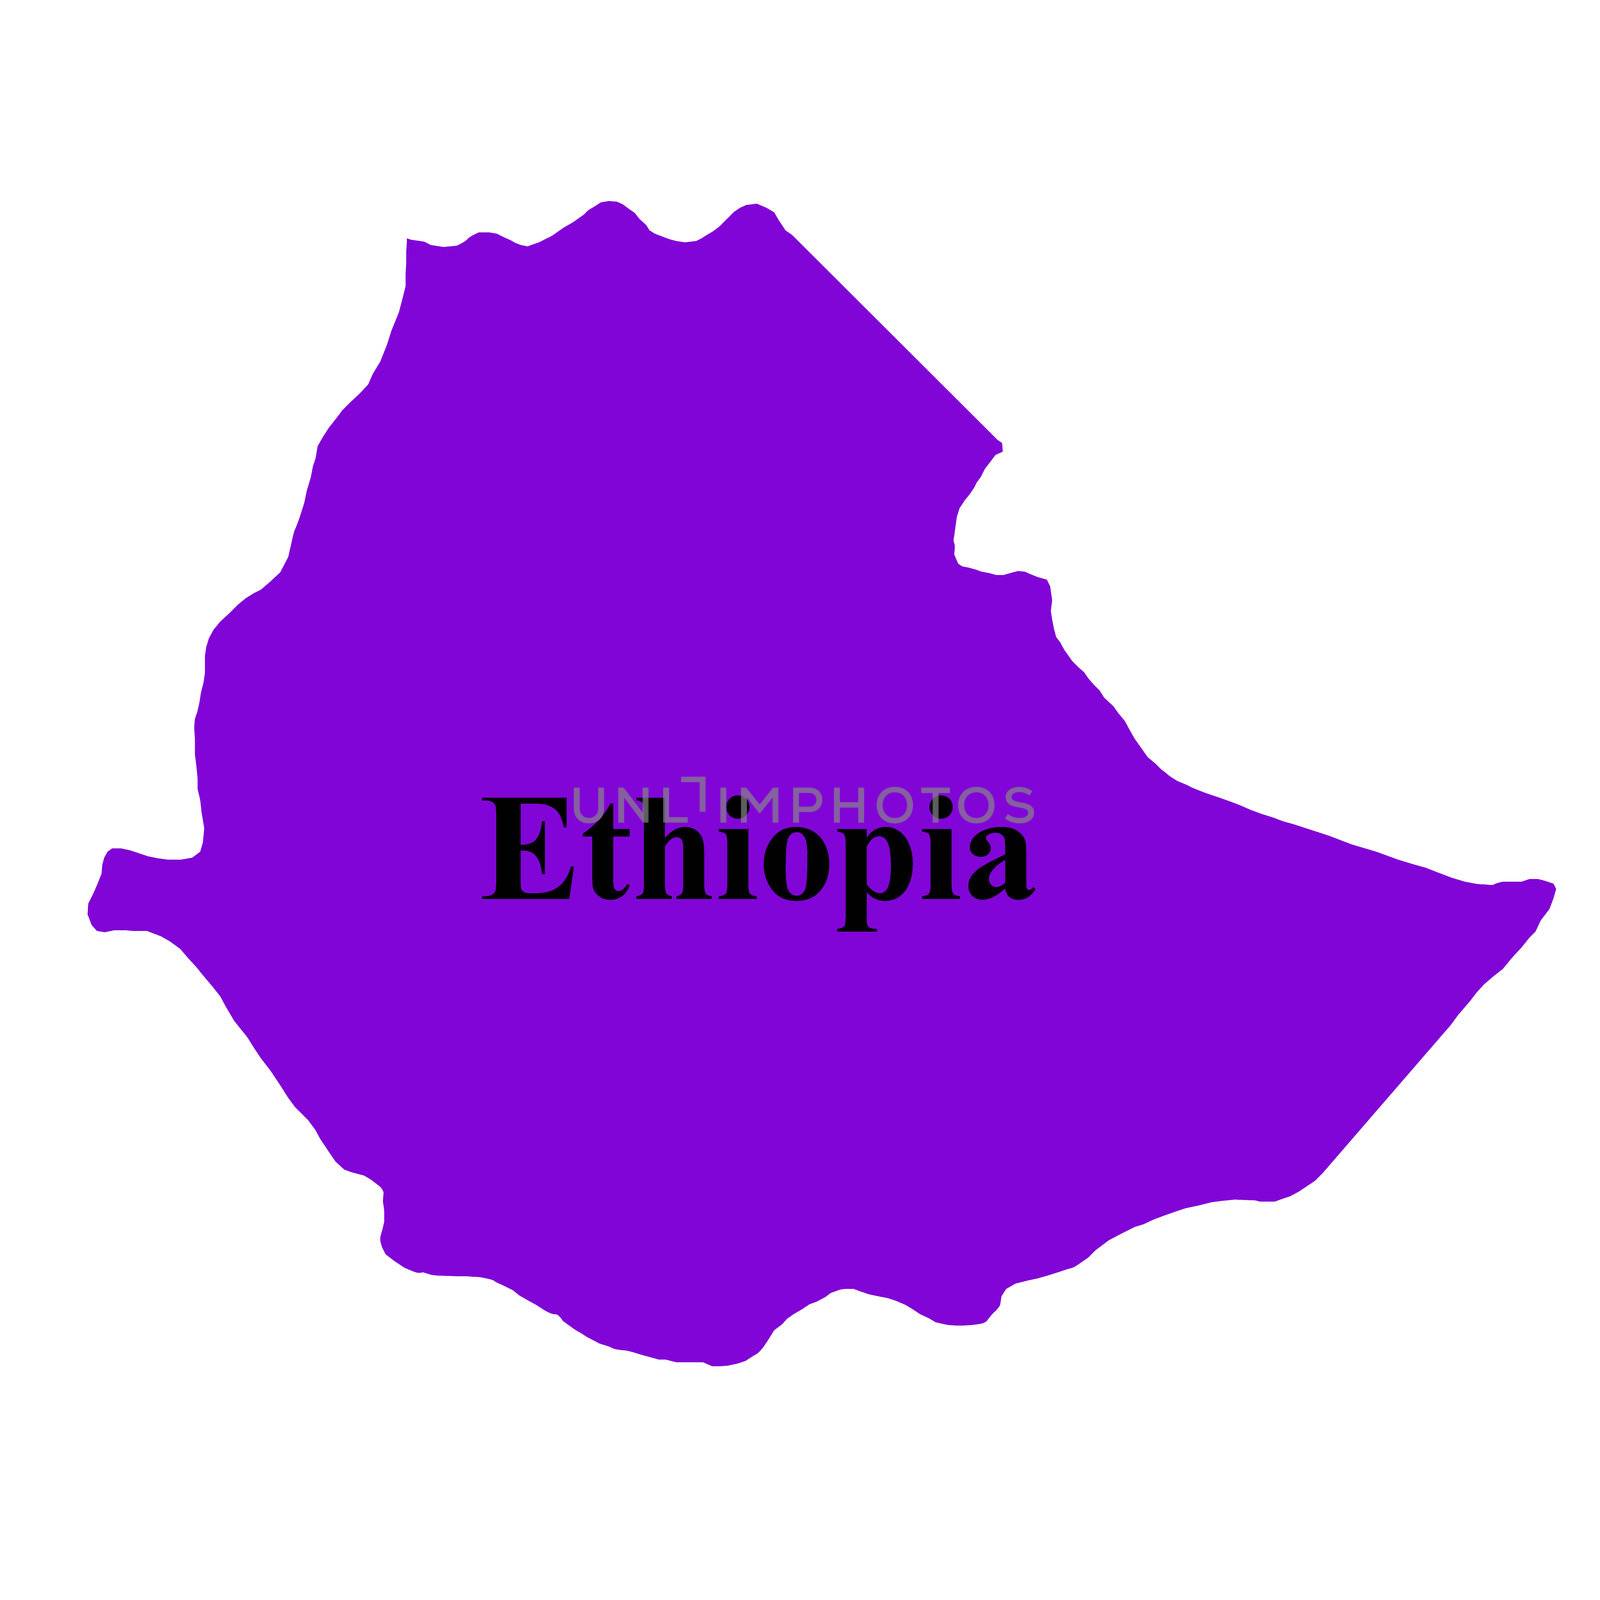 Ethiopia map textures and backgrounds. illustration.